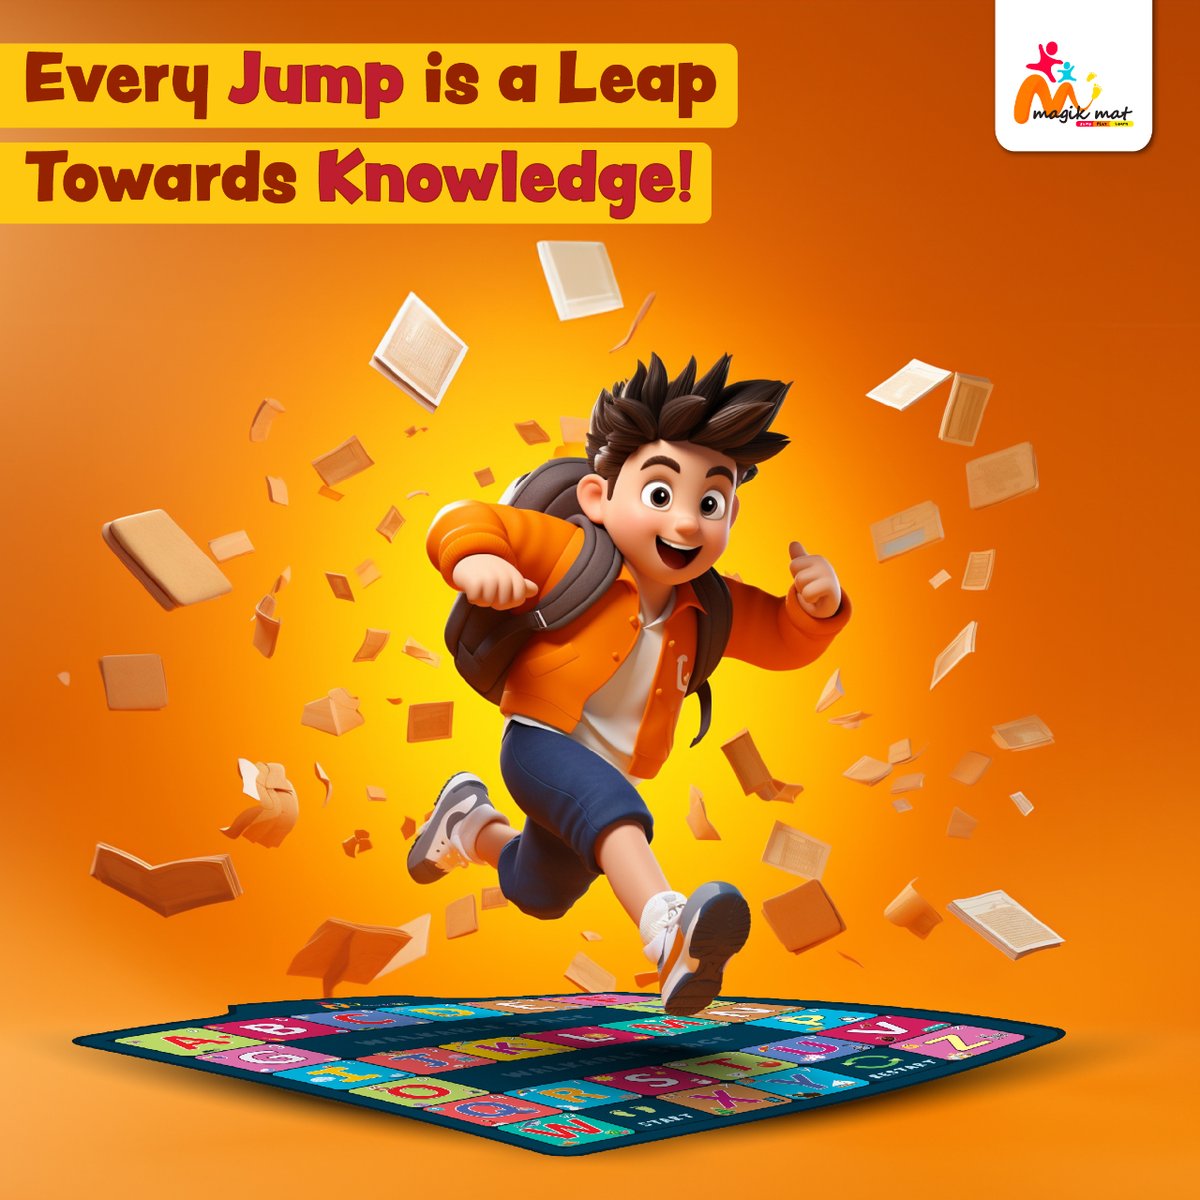 Learning is like jumping on a trampoline with Magik Mat - the more you jump, the higher you reach!

#Magikmat #learningthroughplay #PlayfulLearning #playinggames #highschool #LearningThroughPlay #telugu #playing #PlayBasedLearning #kidsplay #hyperactivekids #viralkids #gifttokids